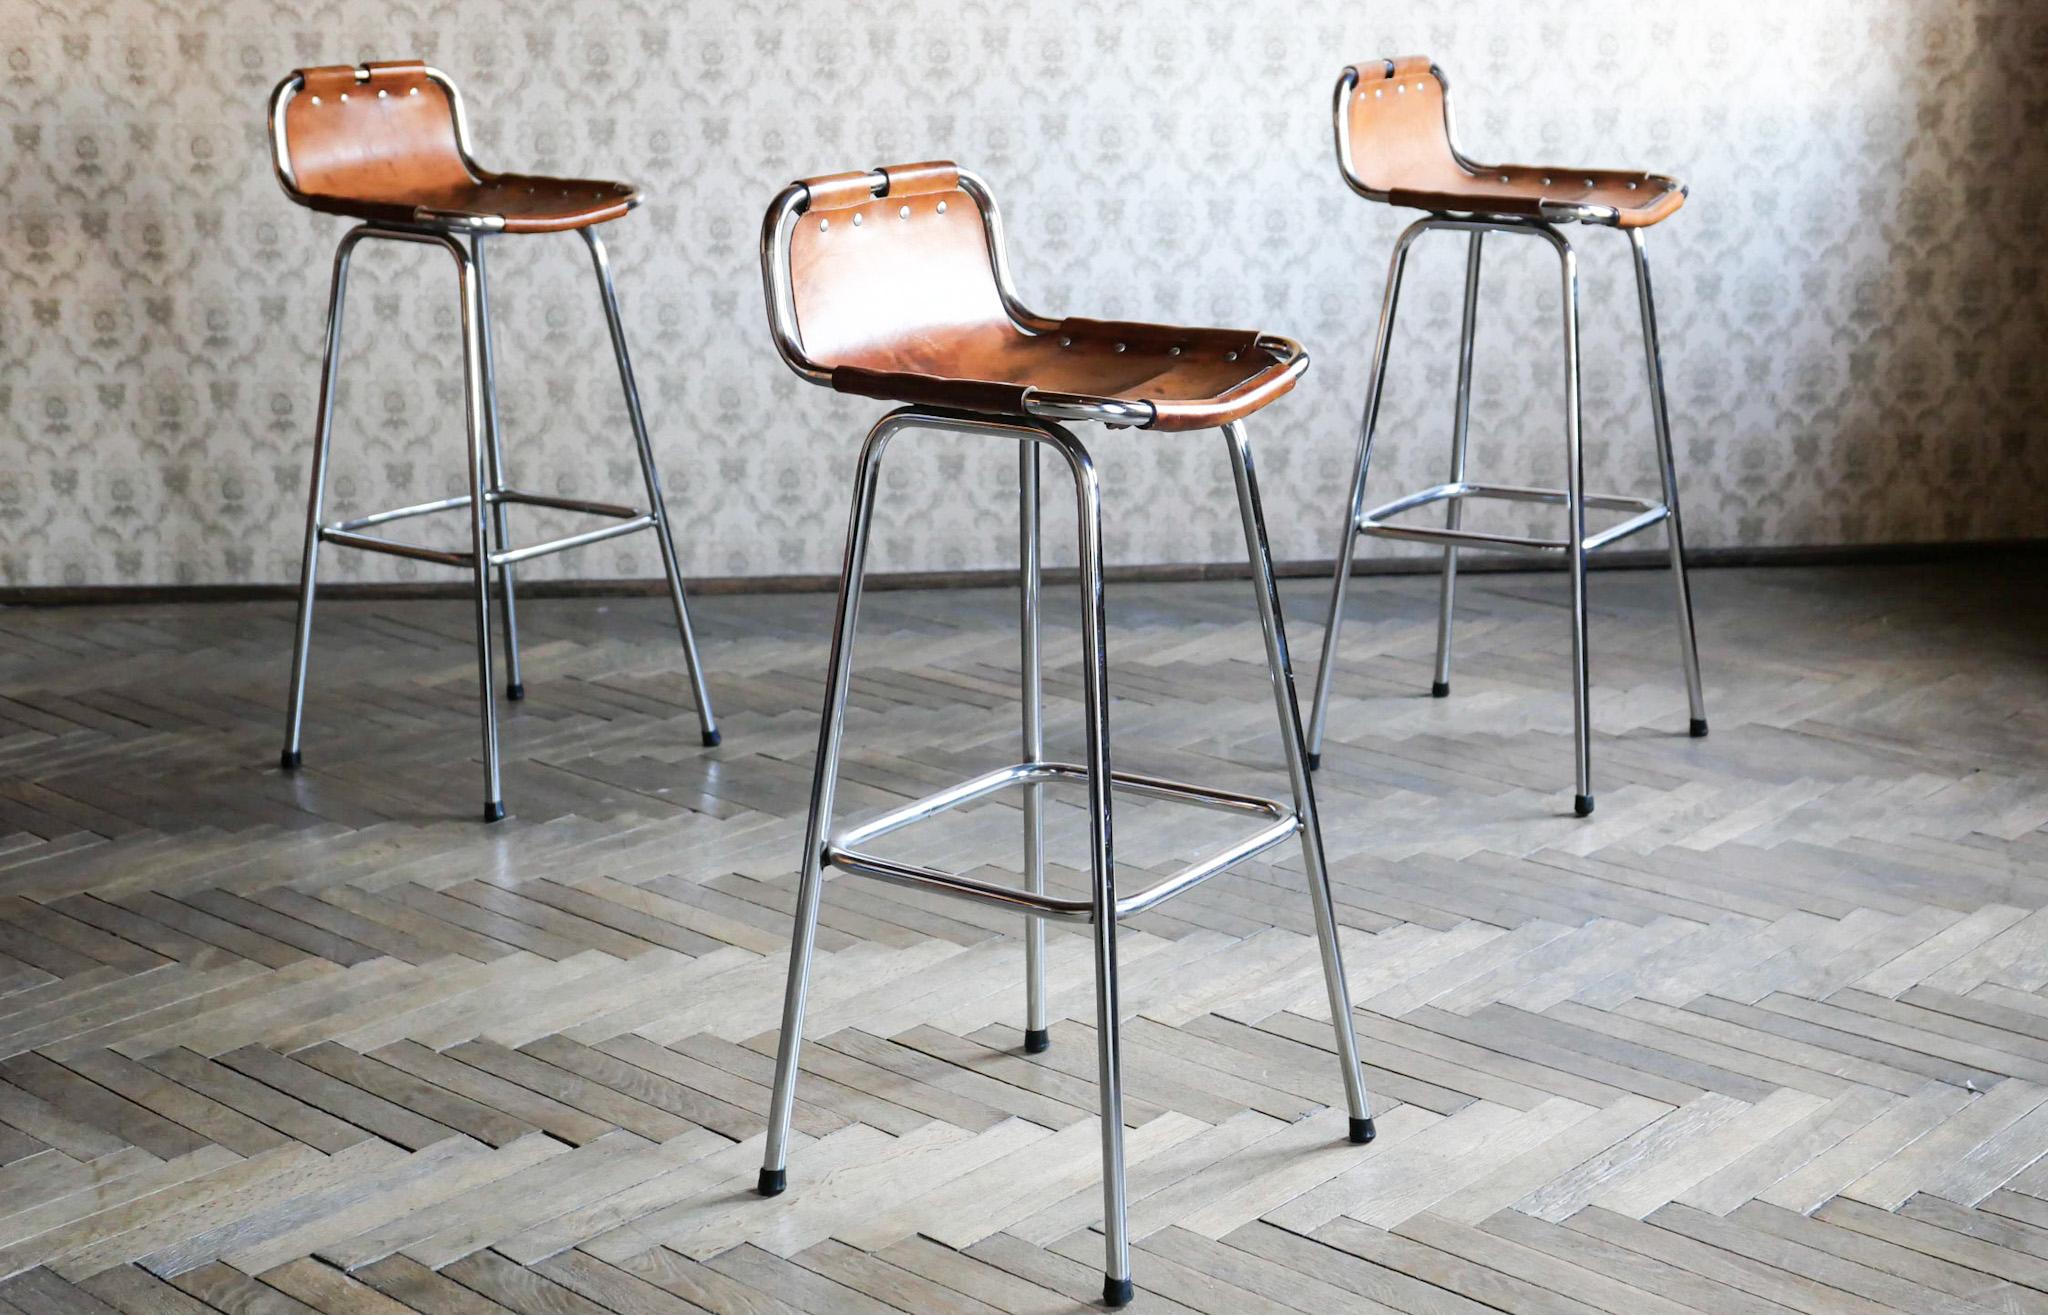 Mid-Century Modern brown saddle leather bar stools, Charlotte Perriand, France 1960s.

Stunning set of 3 French Mid-Century Modern bar stools designed by Charlotte Perriand for the ski resort “Les Arcs” in France 1960. The stools have chrome plated